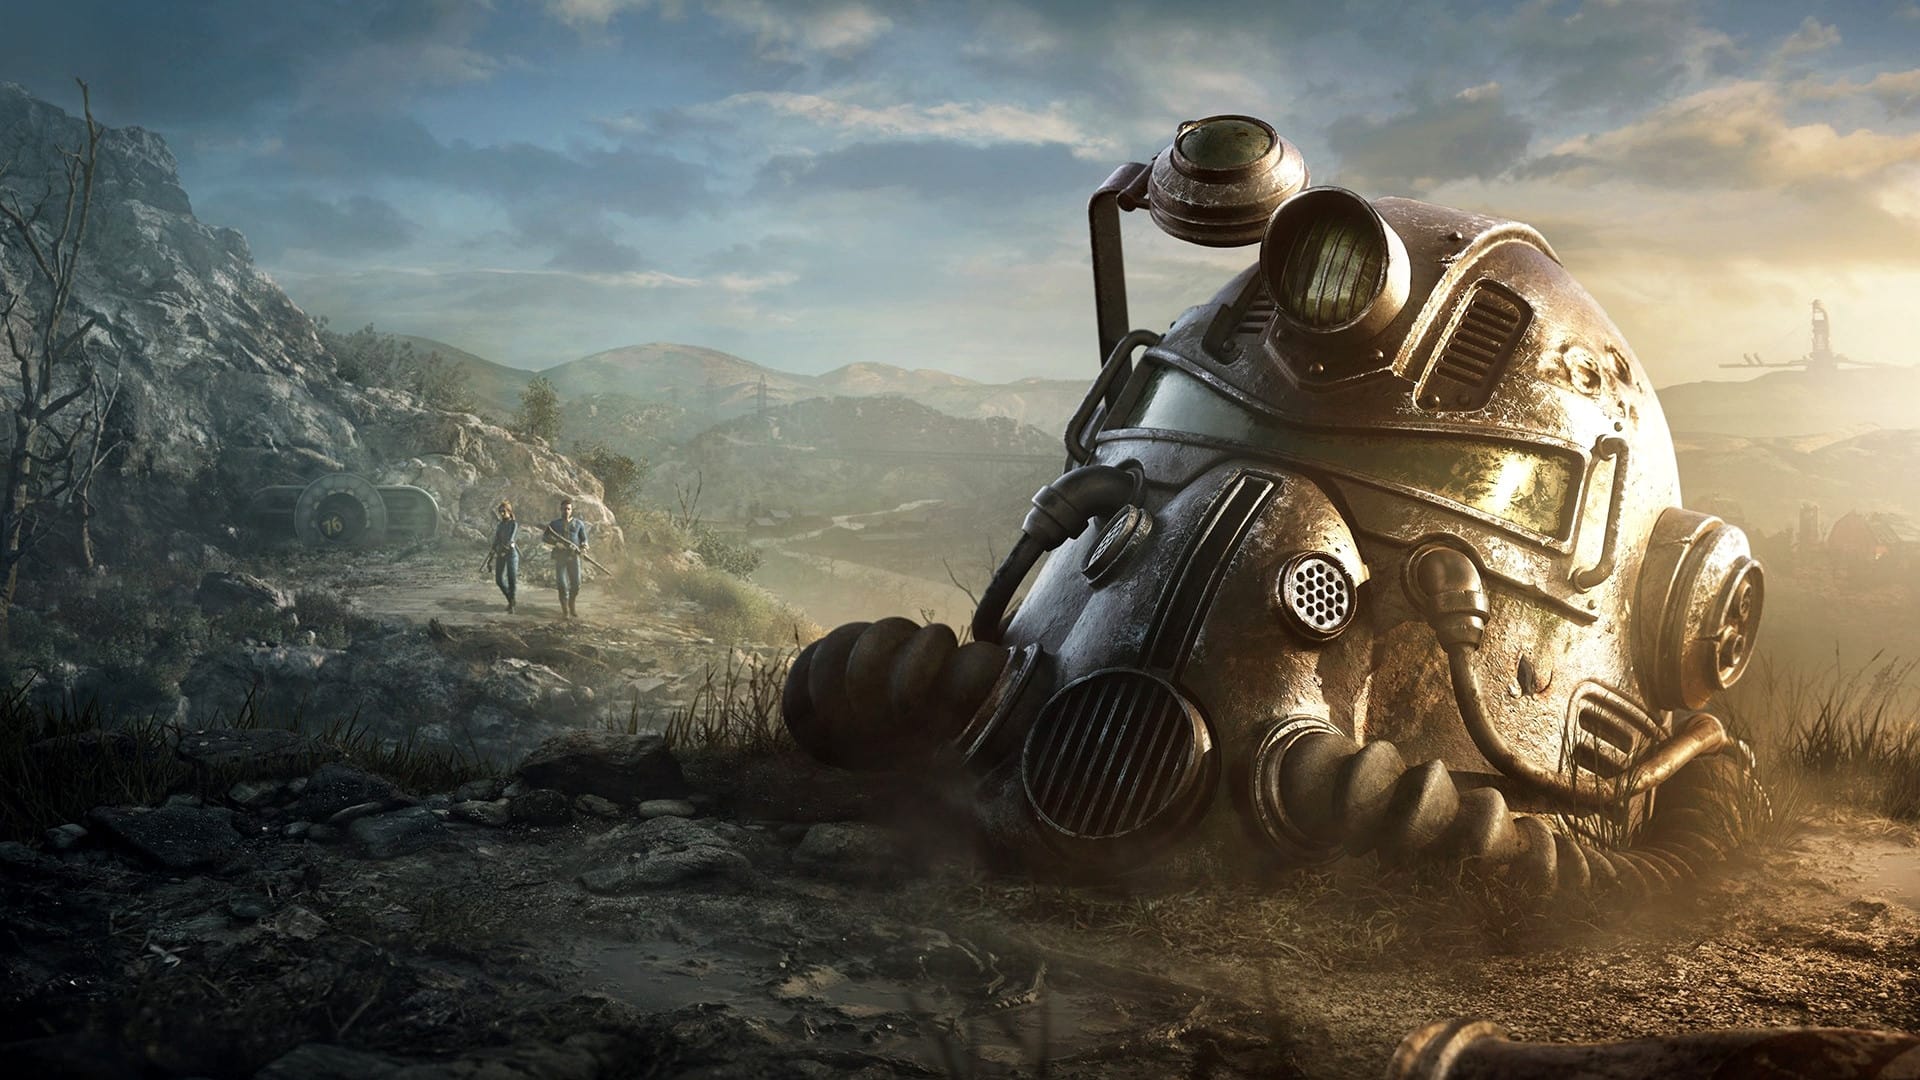 General 1920x1080 helmet Brotherhood of Steel wasteland Fallout 76 Fallout Bethesda Softworks video games power armor